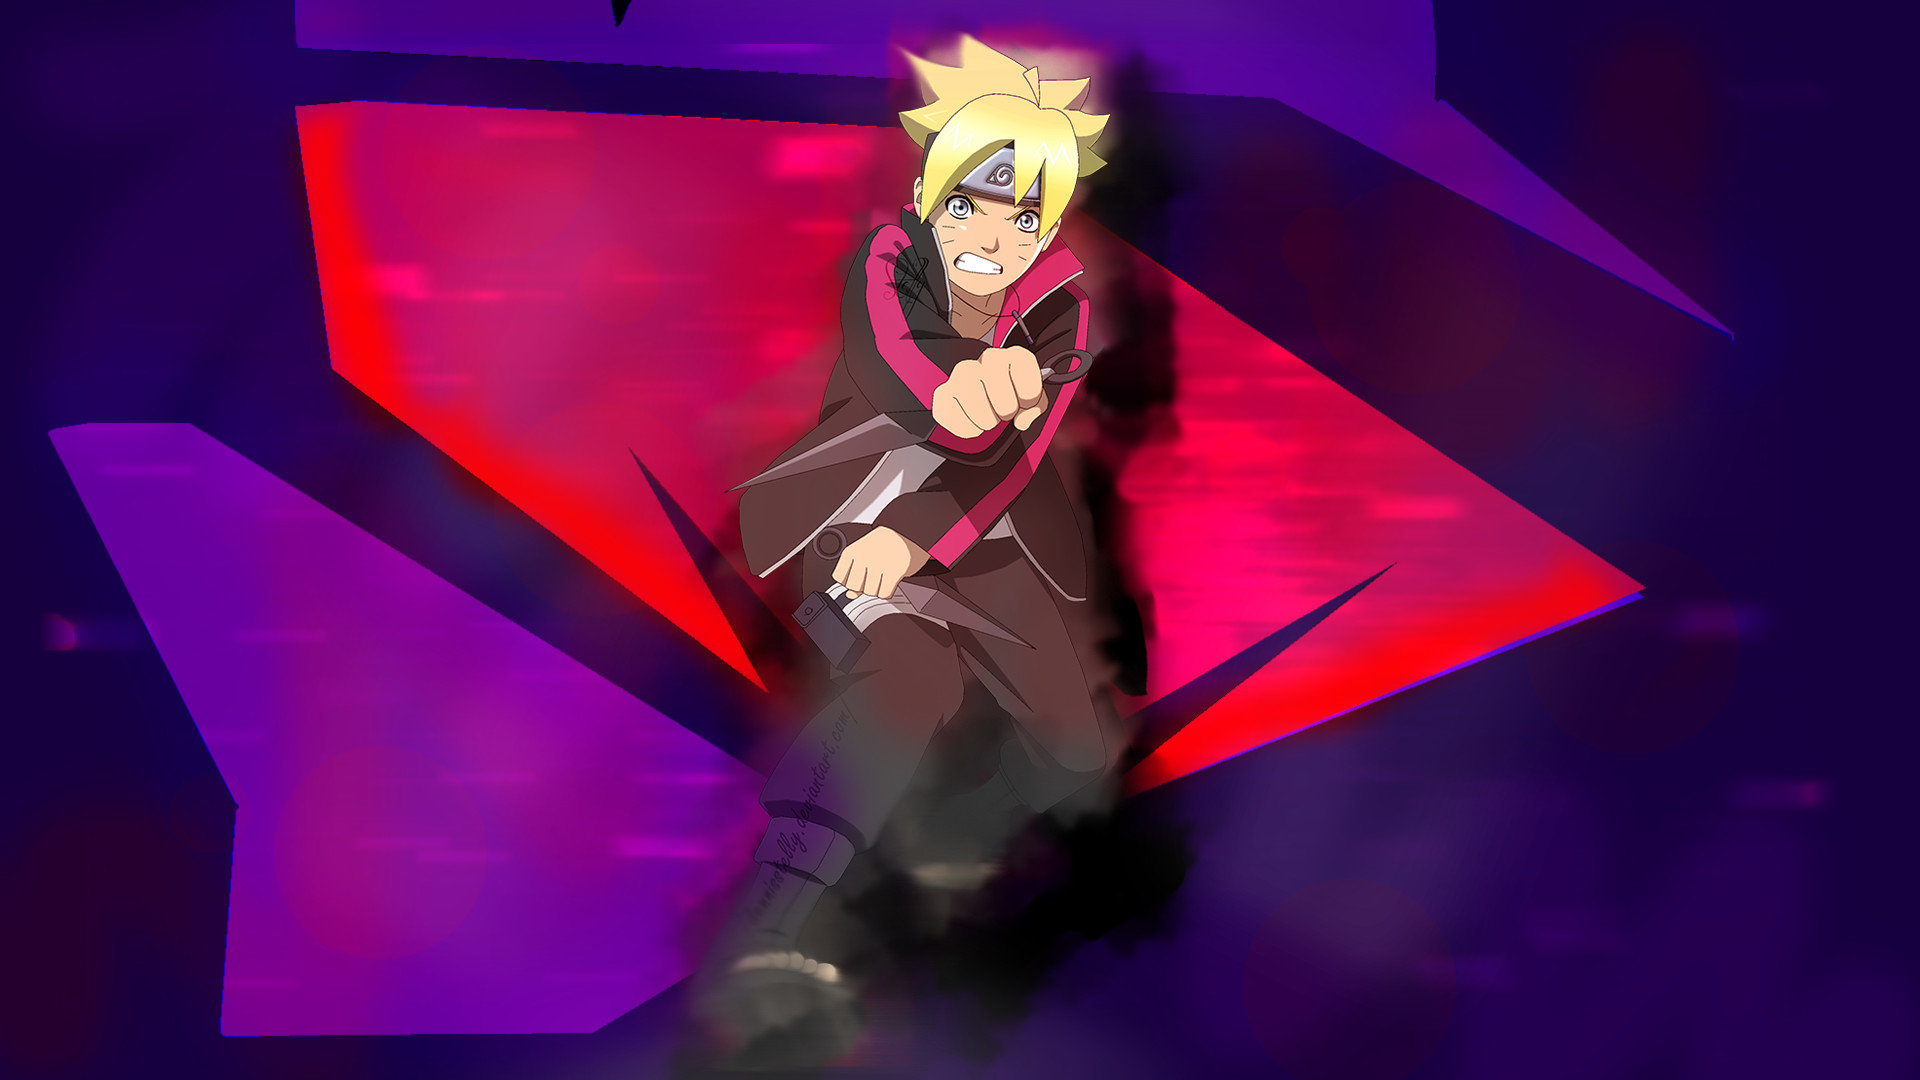 Awesome Boruto Naruto The Movie Free Wallpaper Id 3277 For Full Hd 1080p Pc